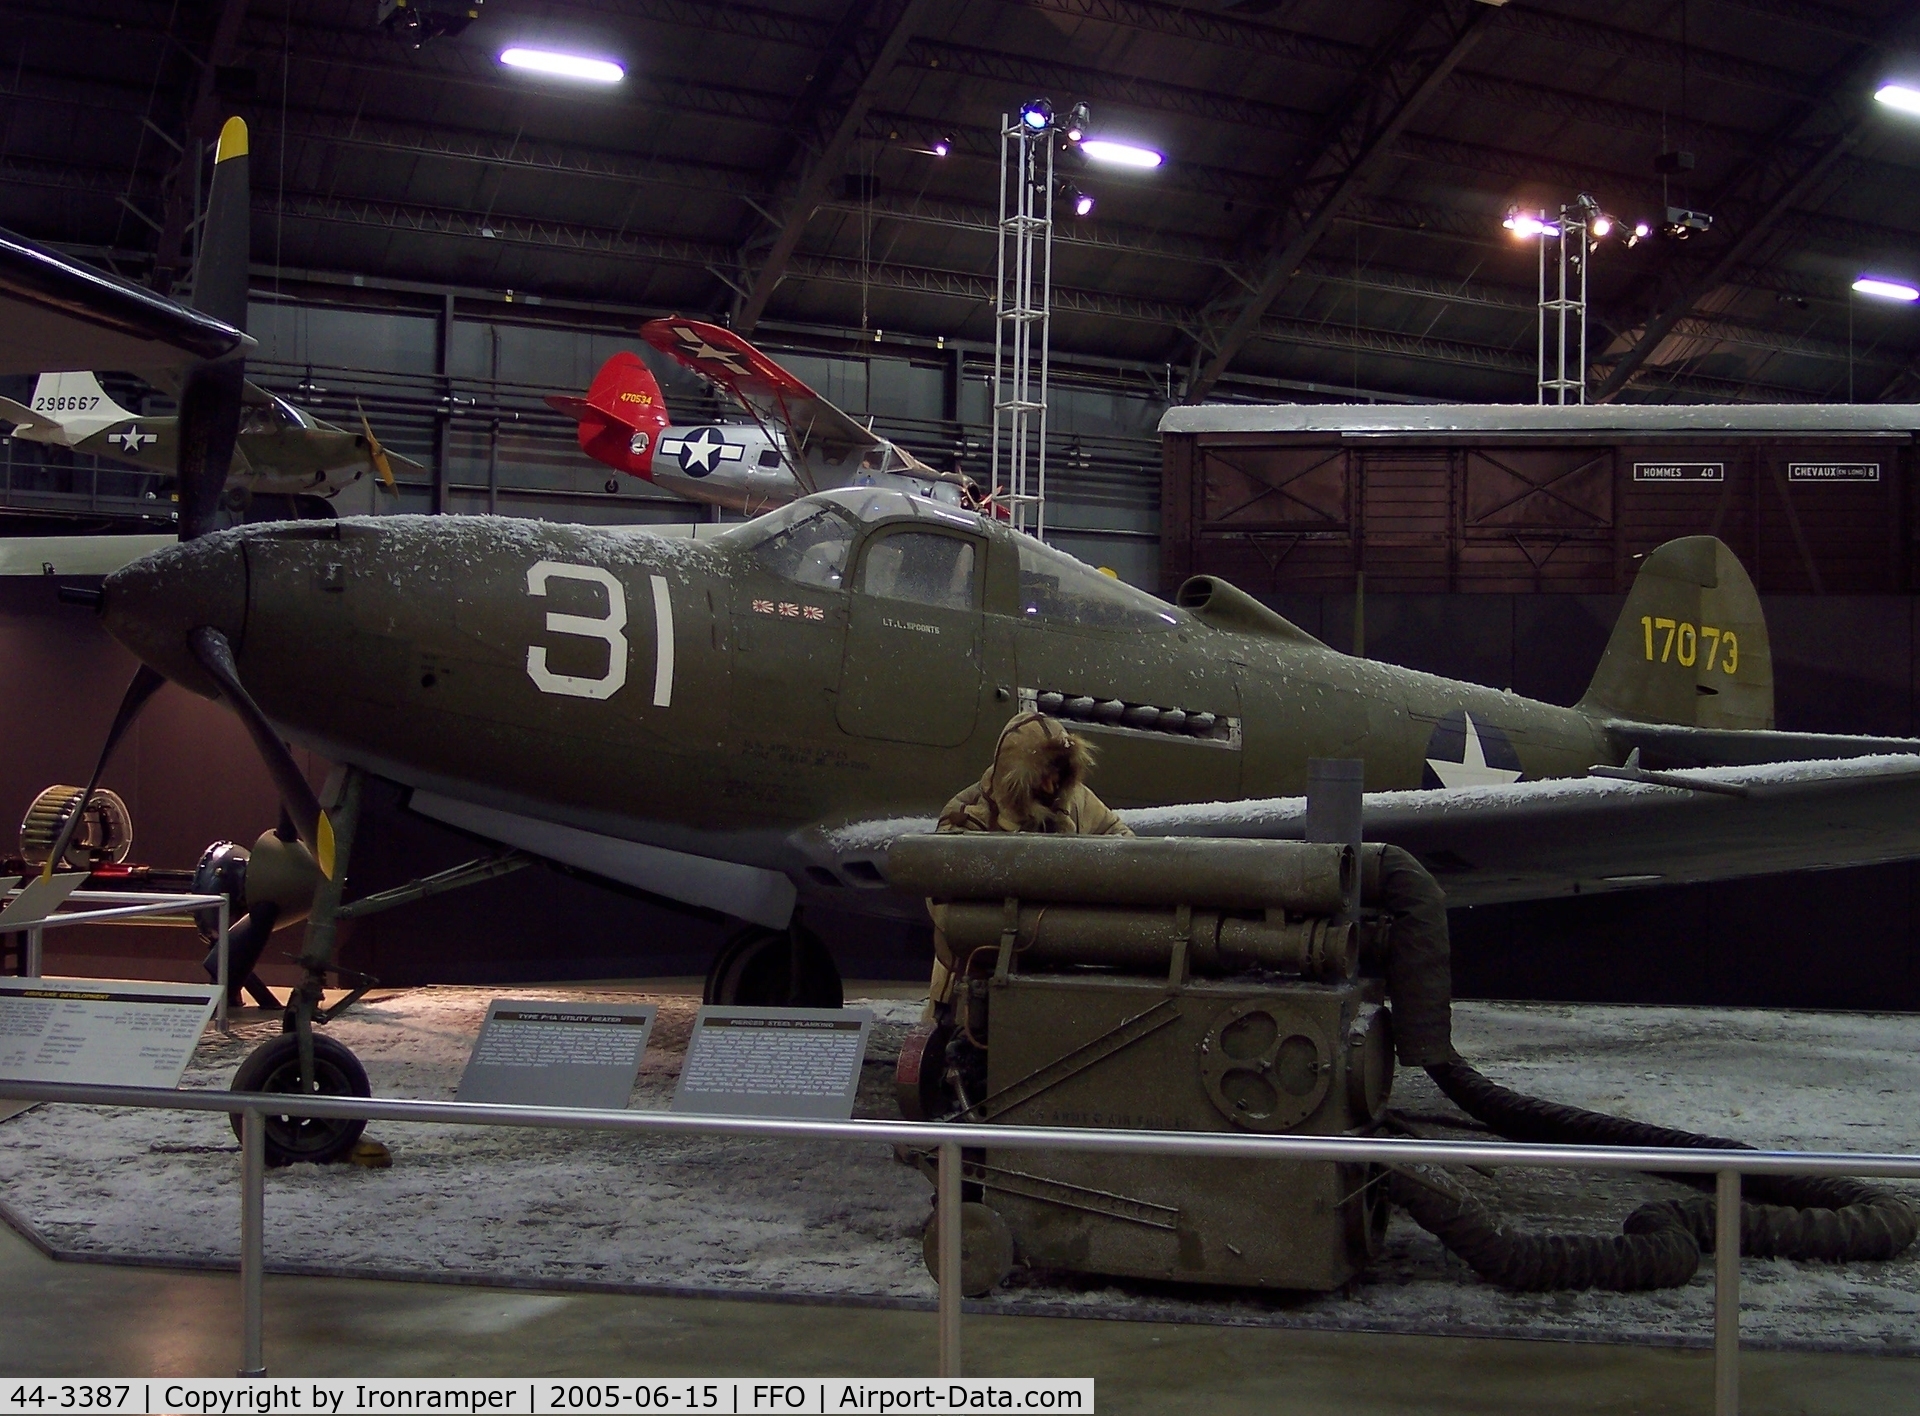 44-3387, 1944 Bell P-39Q Airacobra C/N Not found 44-3387, This “Airacobra” is painted to represent the P-39J (s/n 41-7073) flown by Lt. Leslie Spoonts of the 57th Fighter Squadron in 1942 while based on Kodiak and Adak Islands during the Aleutian Campaign.